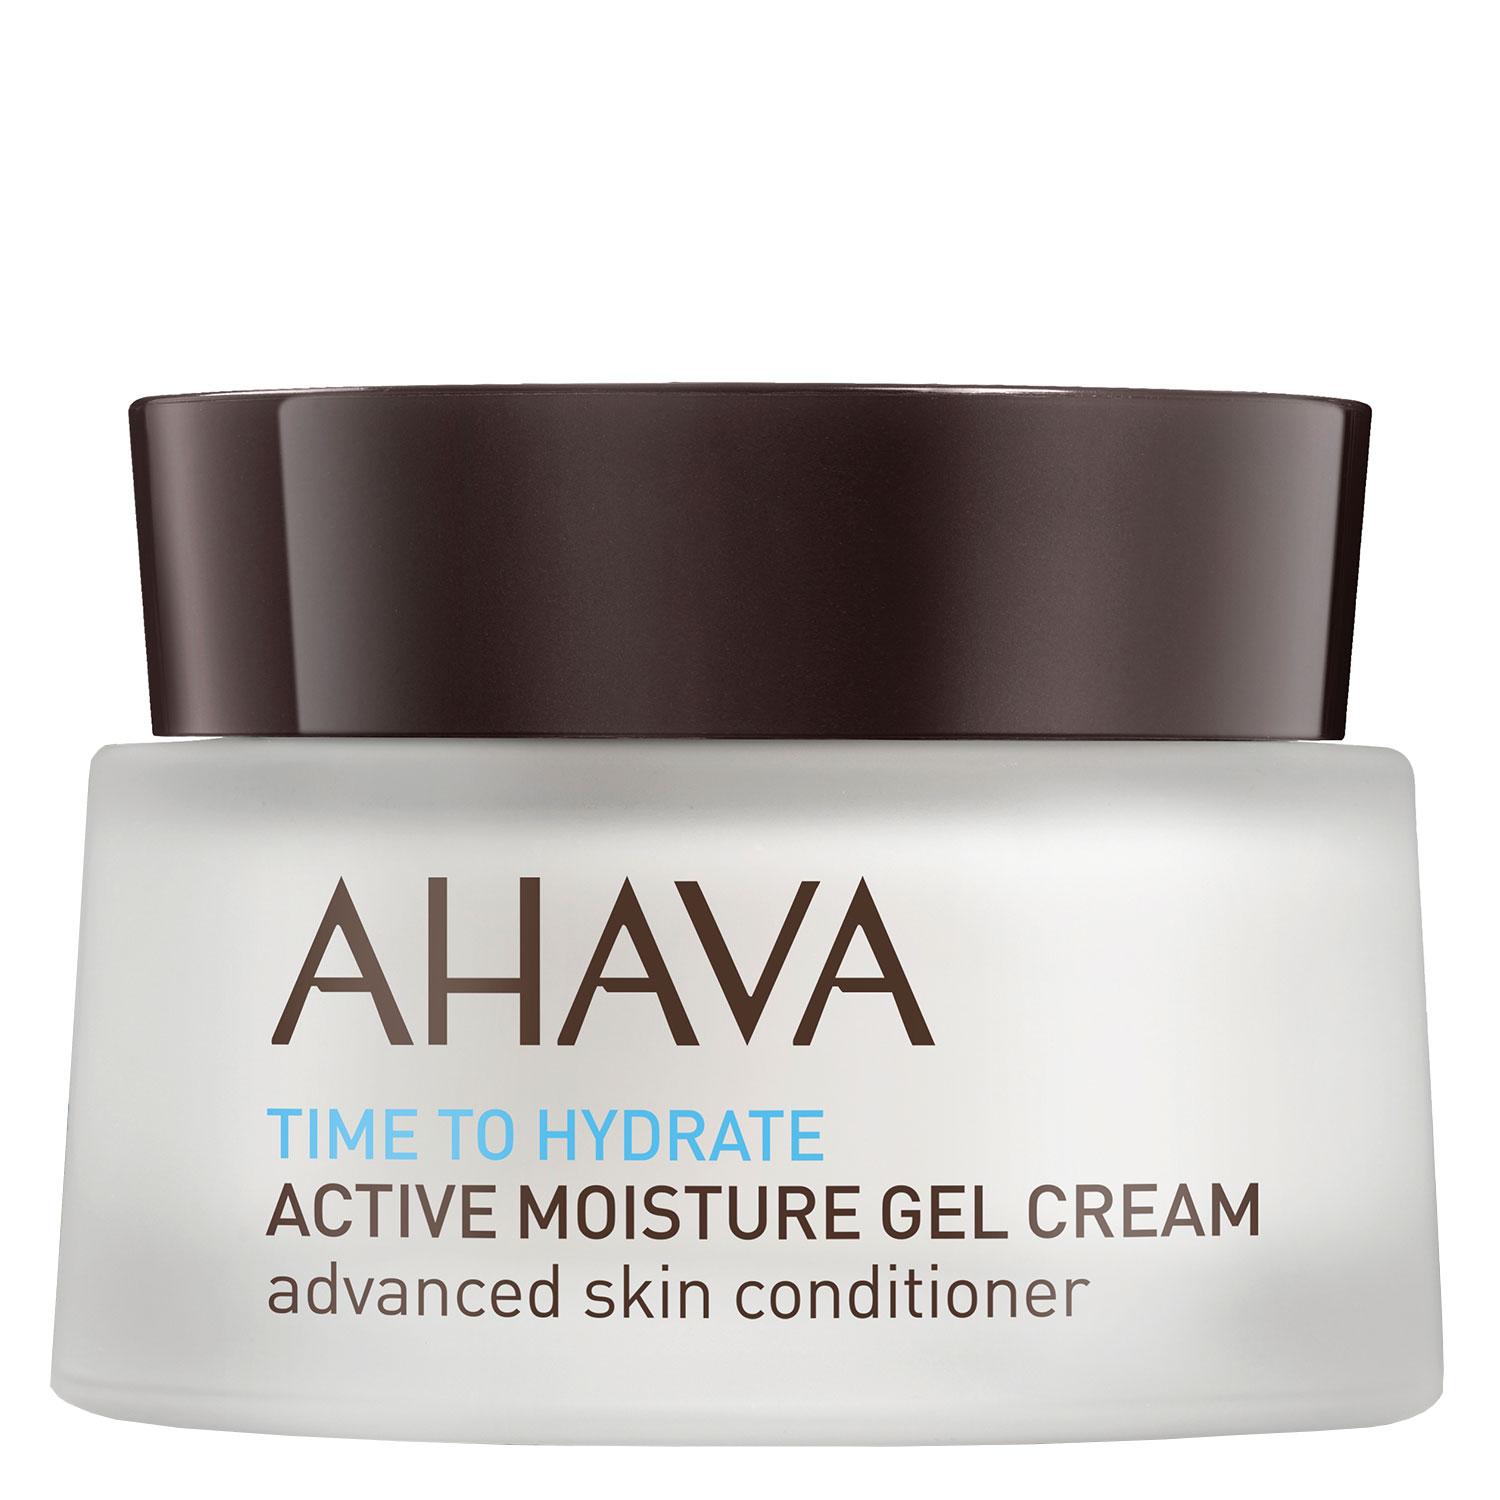 Time To Hydrate - Active Moisture Gel Cream